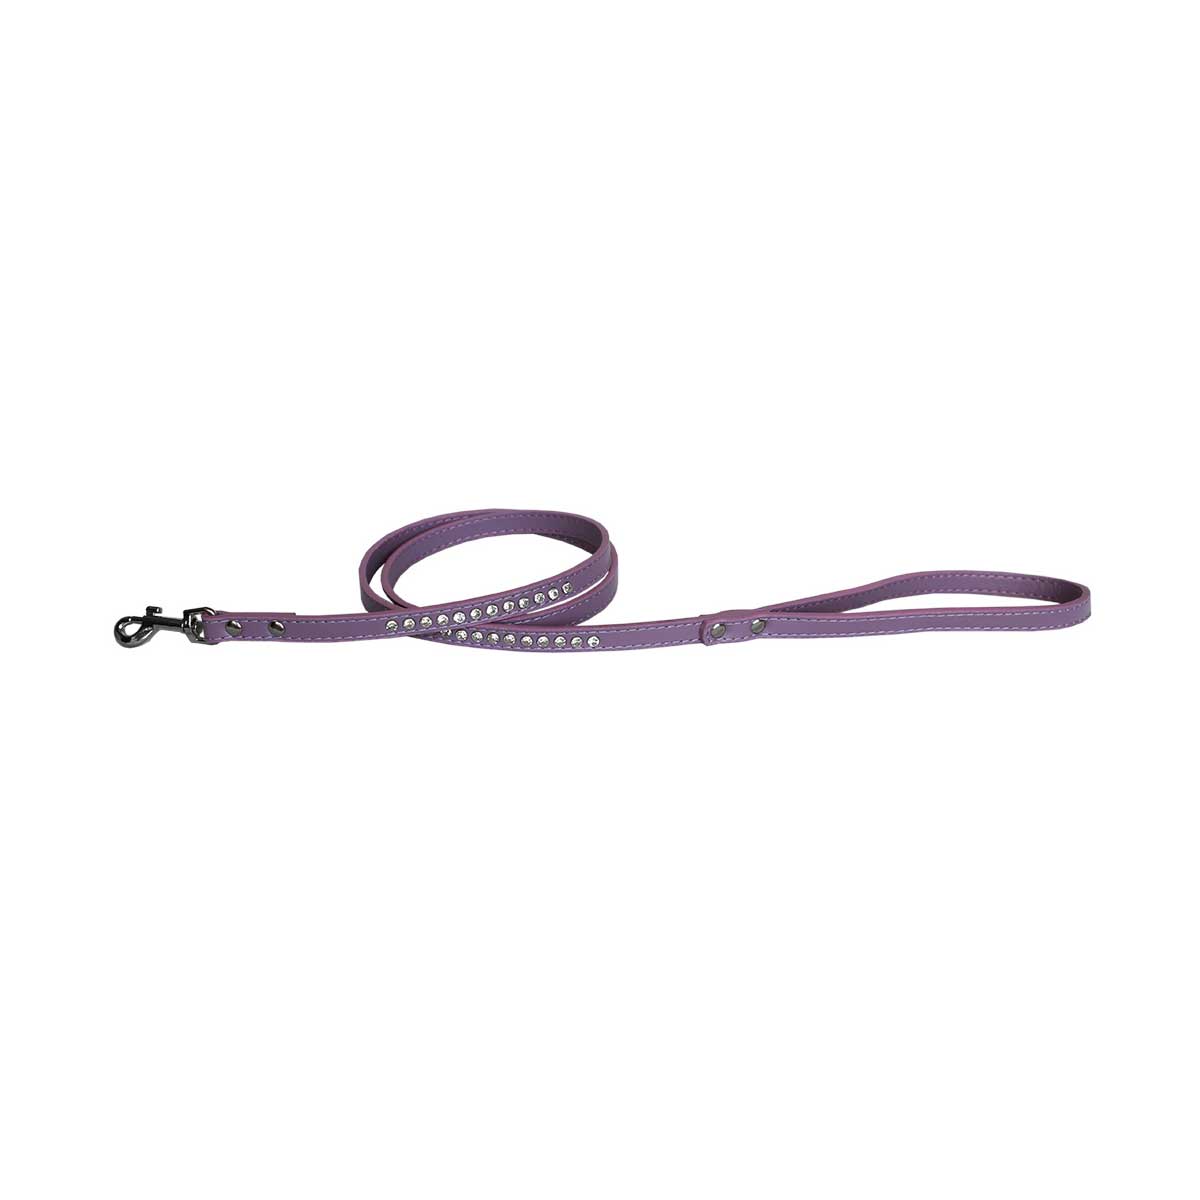 Clear Jewel Faux Leather Pet Leash in Lavender | Pawlicious & Company